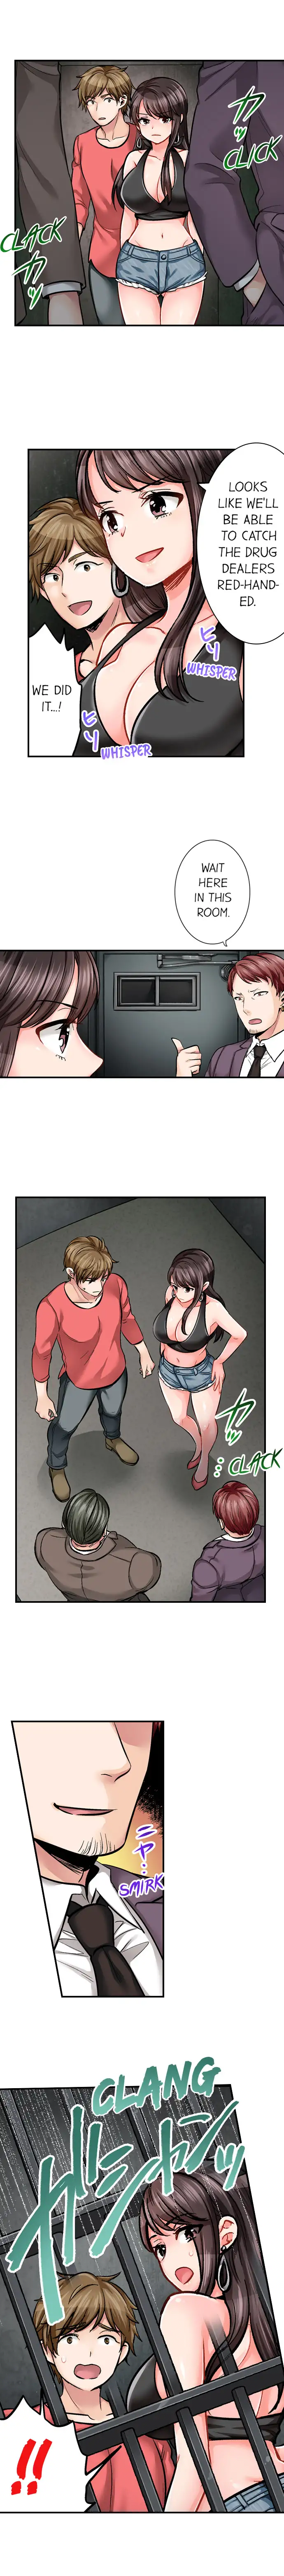 Sex is Part of Undercover Agent’s Job? - Chapter 13 Page 2